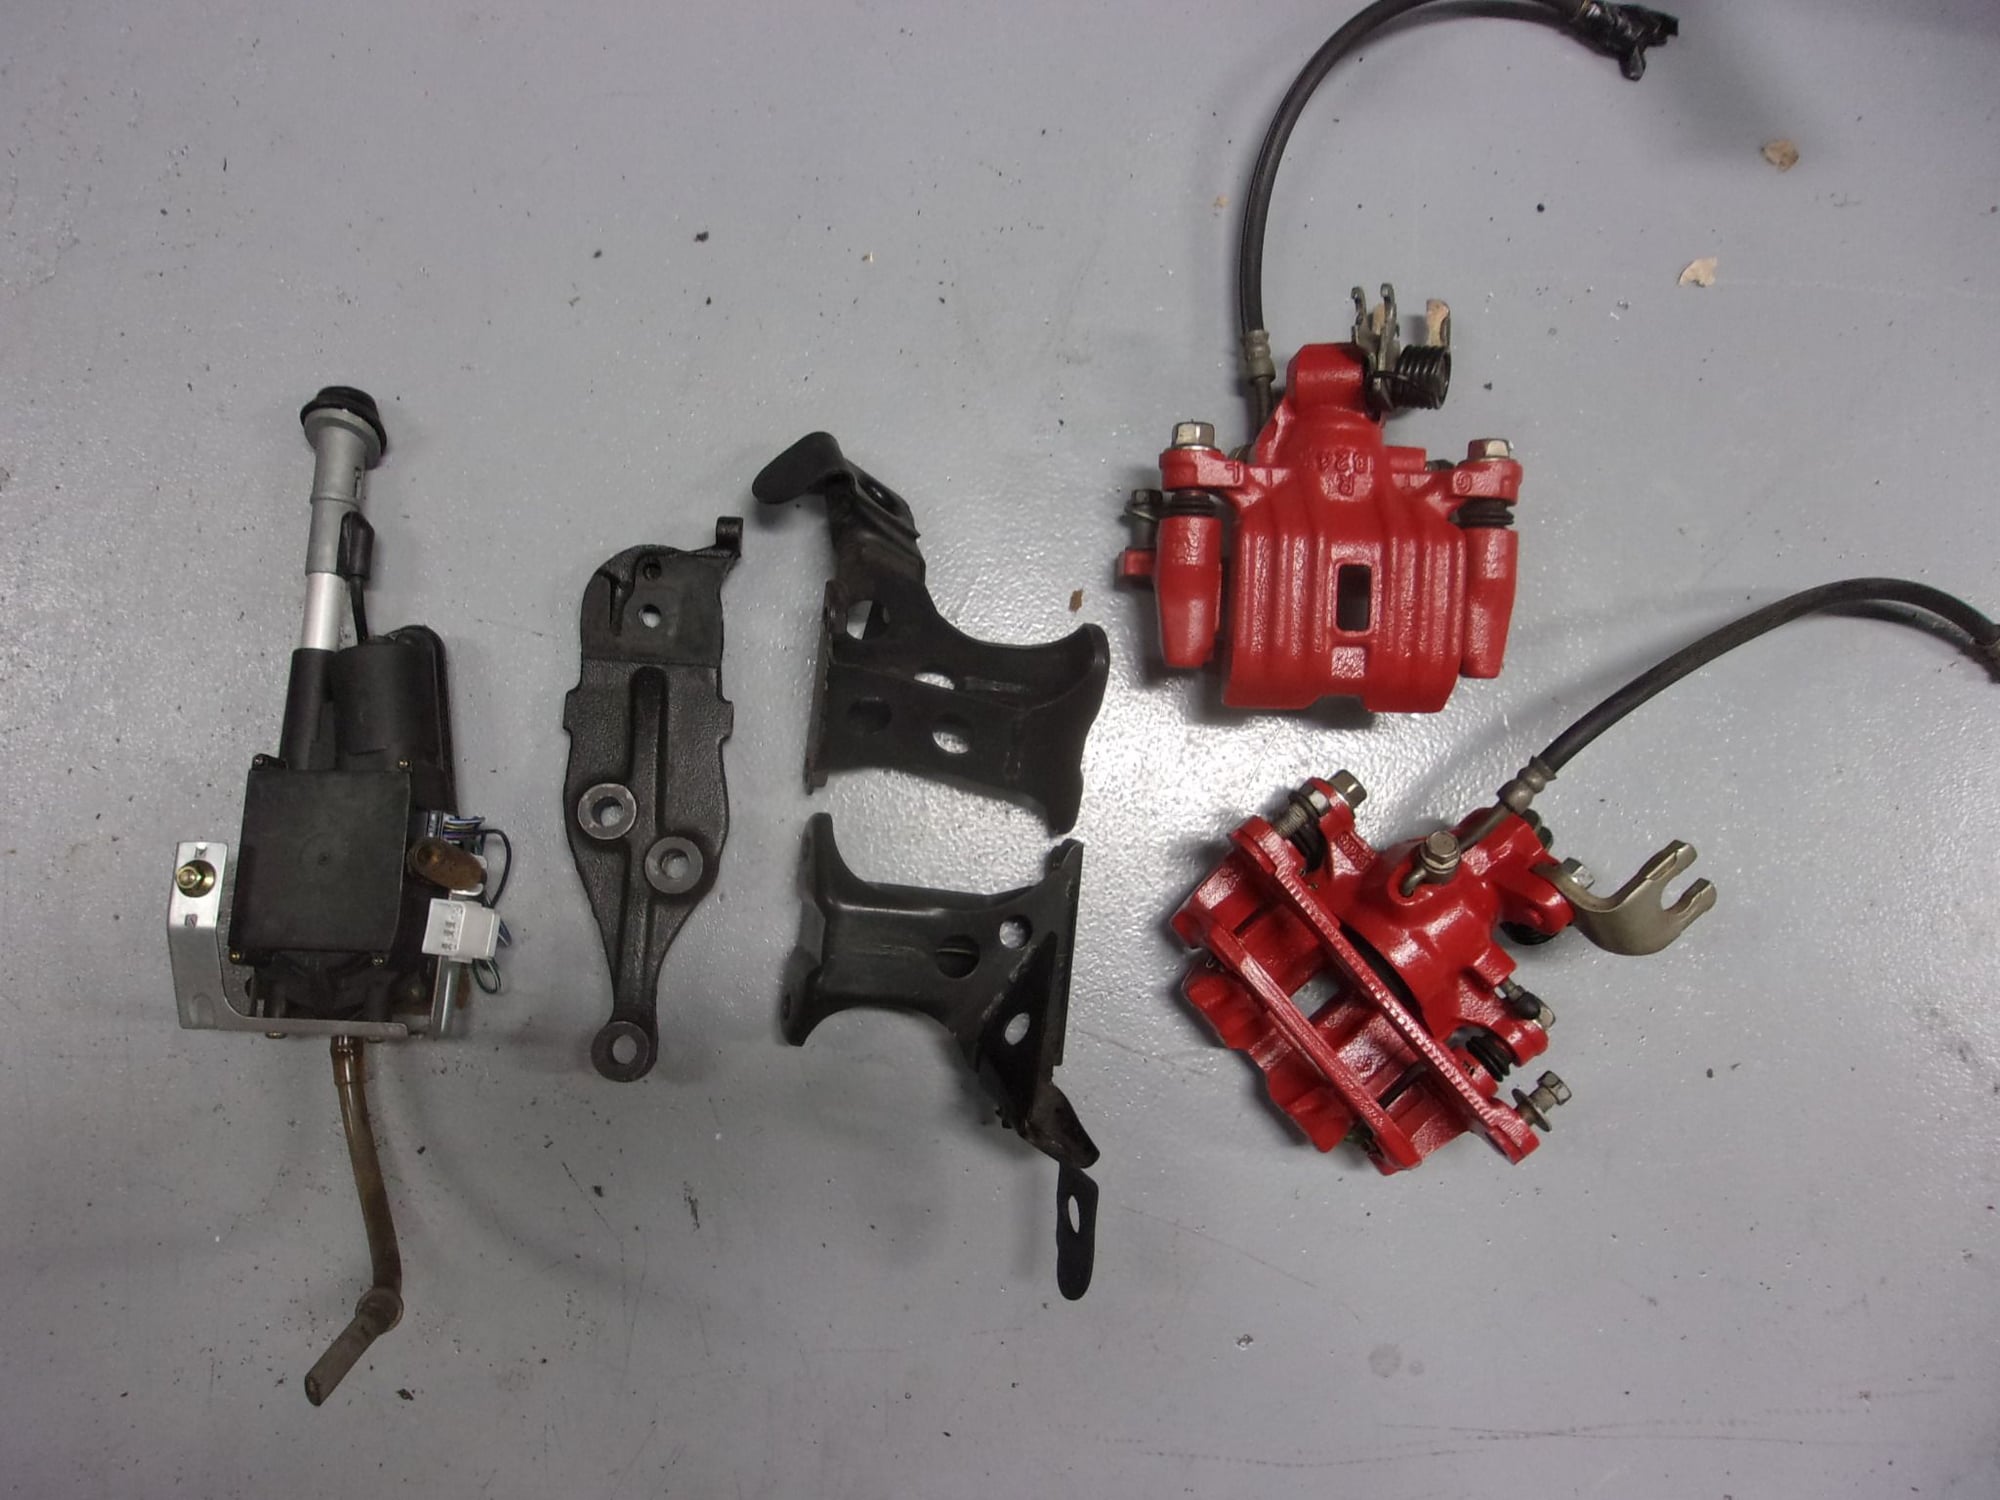 Engine - Electrical - Hard-to-find parts #13 - Used - 1993 to 2002 Mazda RX-7 - Murfreesboro, TN 37130, United States